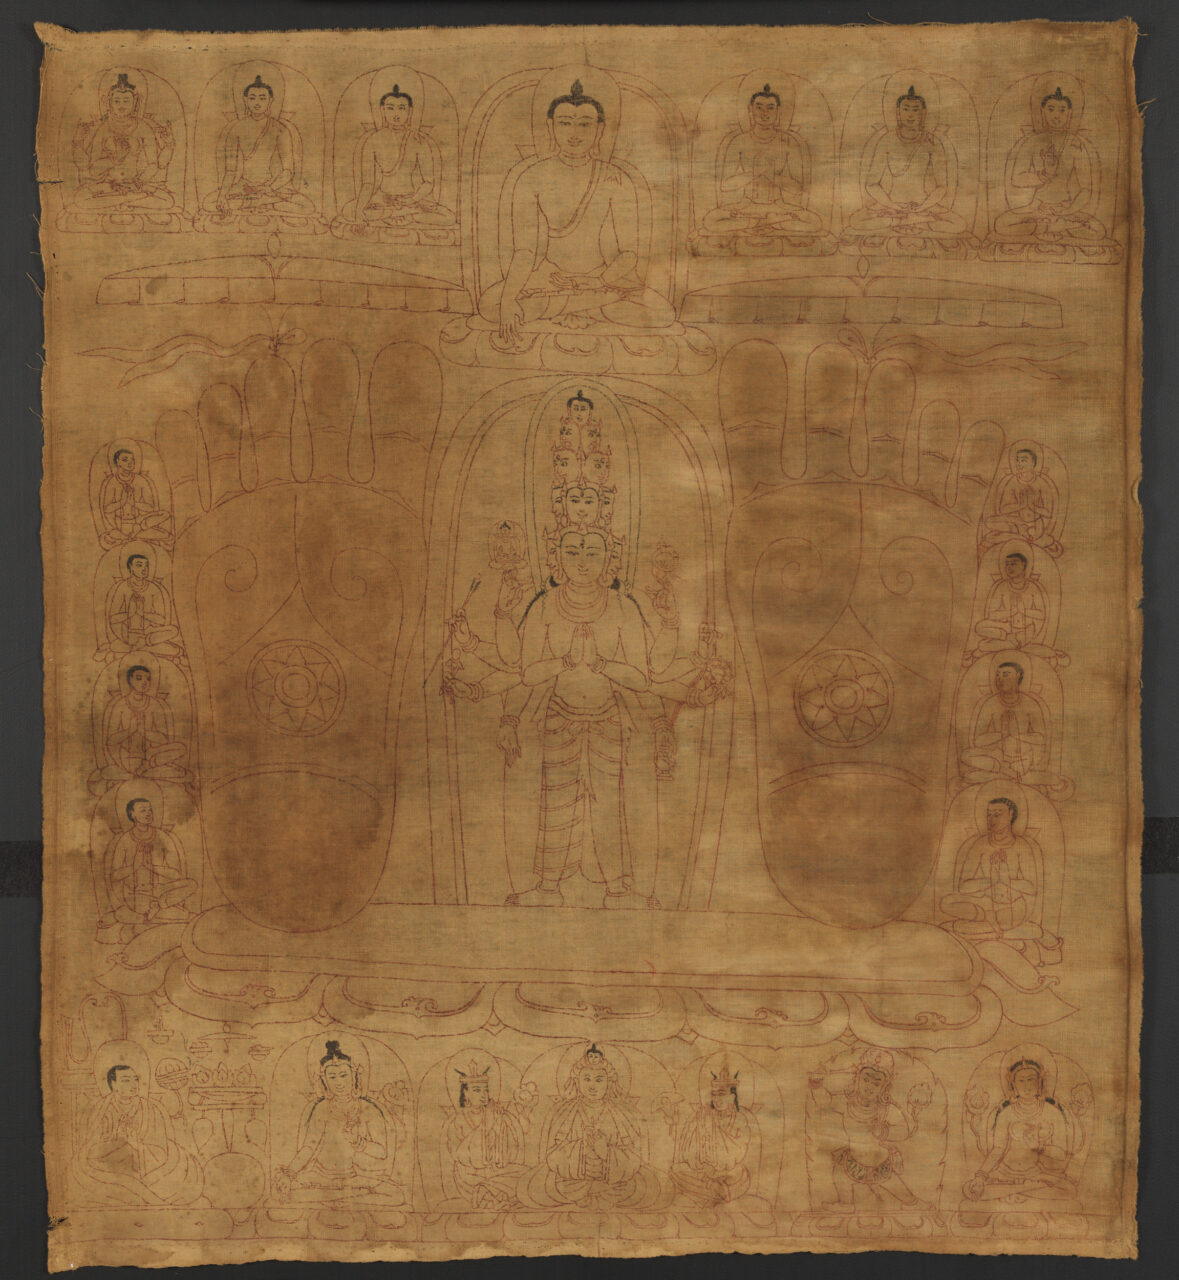 Two faint footprints astride line-drawn many-headed deity, surrounded by deity portraits against sepia background